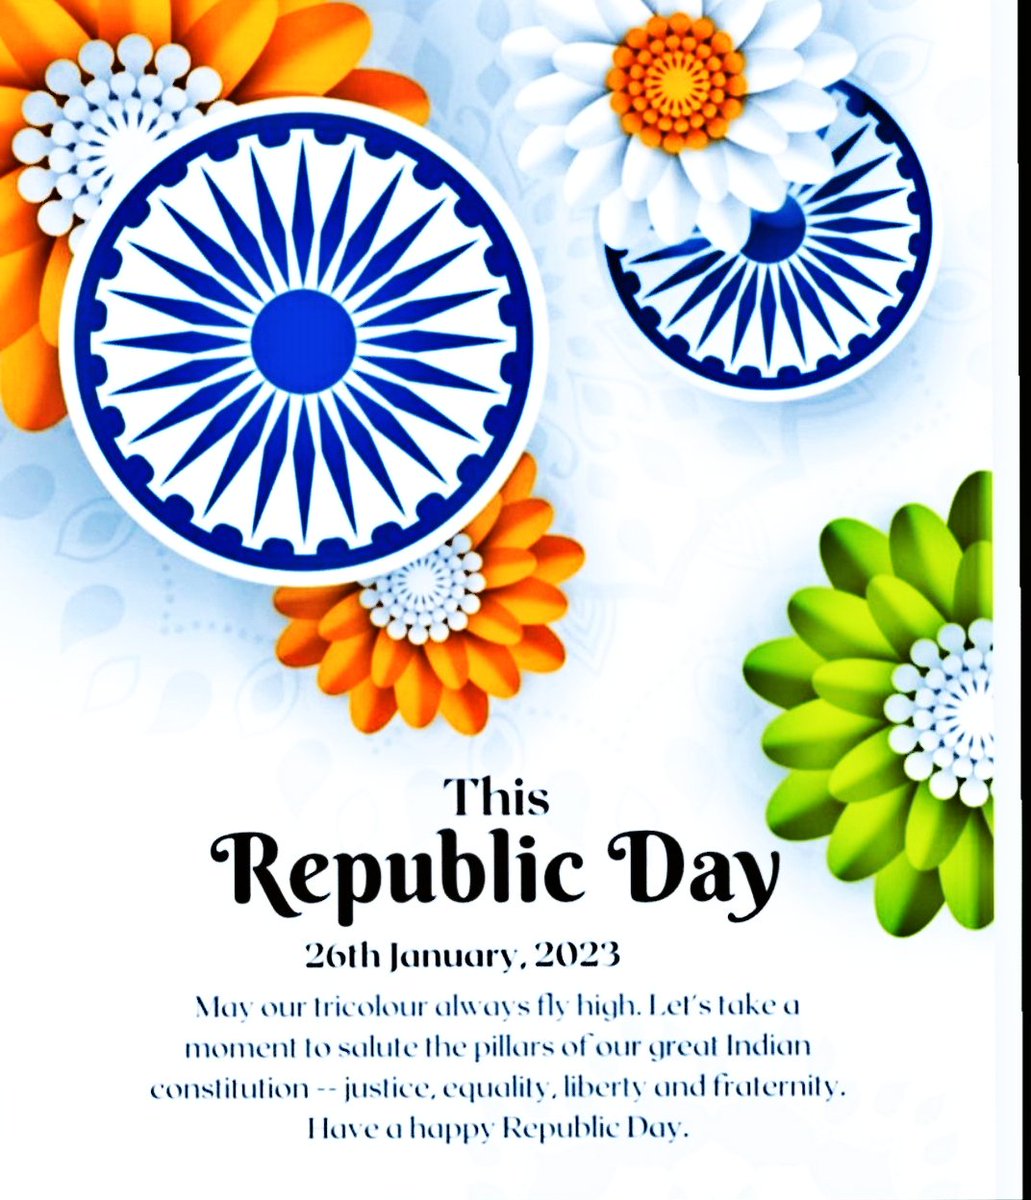 Wishing you all a very Happy Republic day today...Jai Hind🙏
#RepublicDay #RepublicDay2023 #indianholiday #Constitution #Indian #india #DelhiNCR